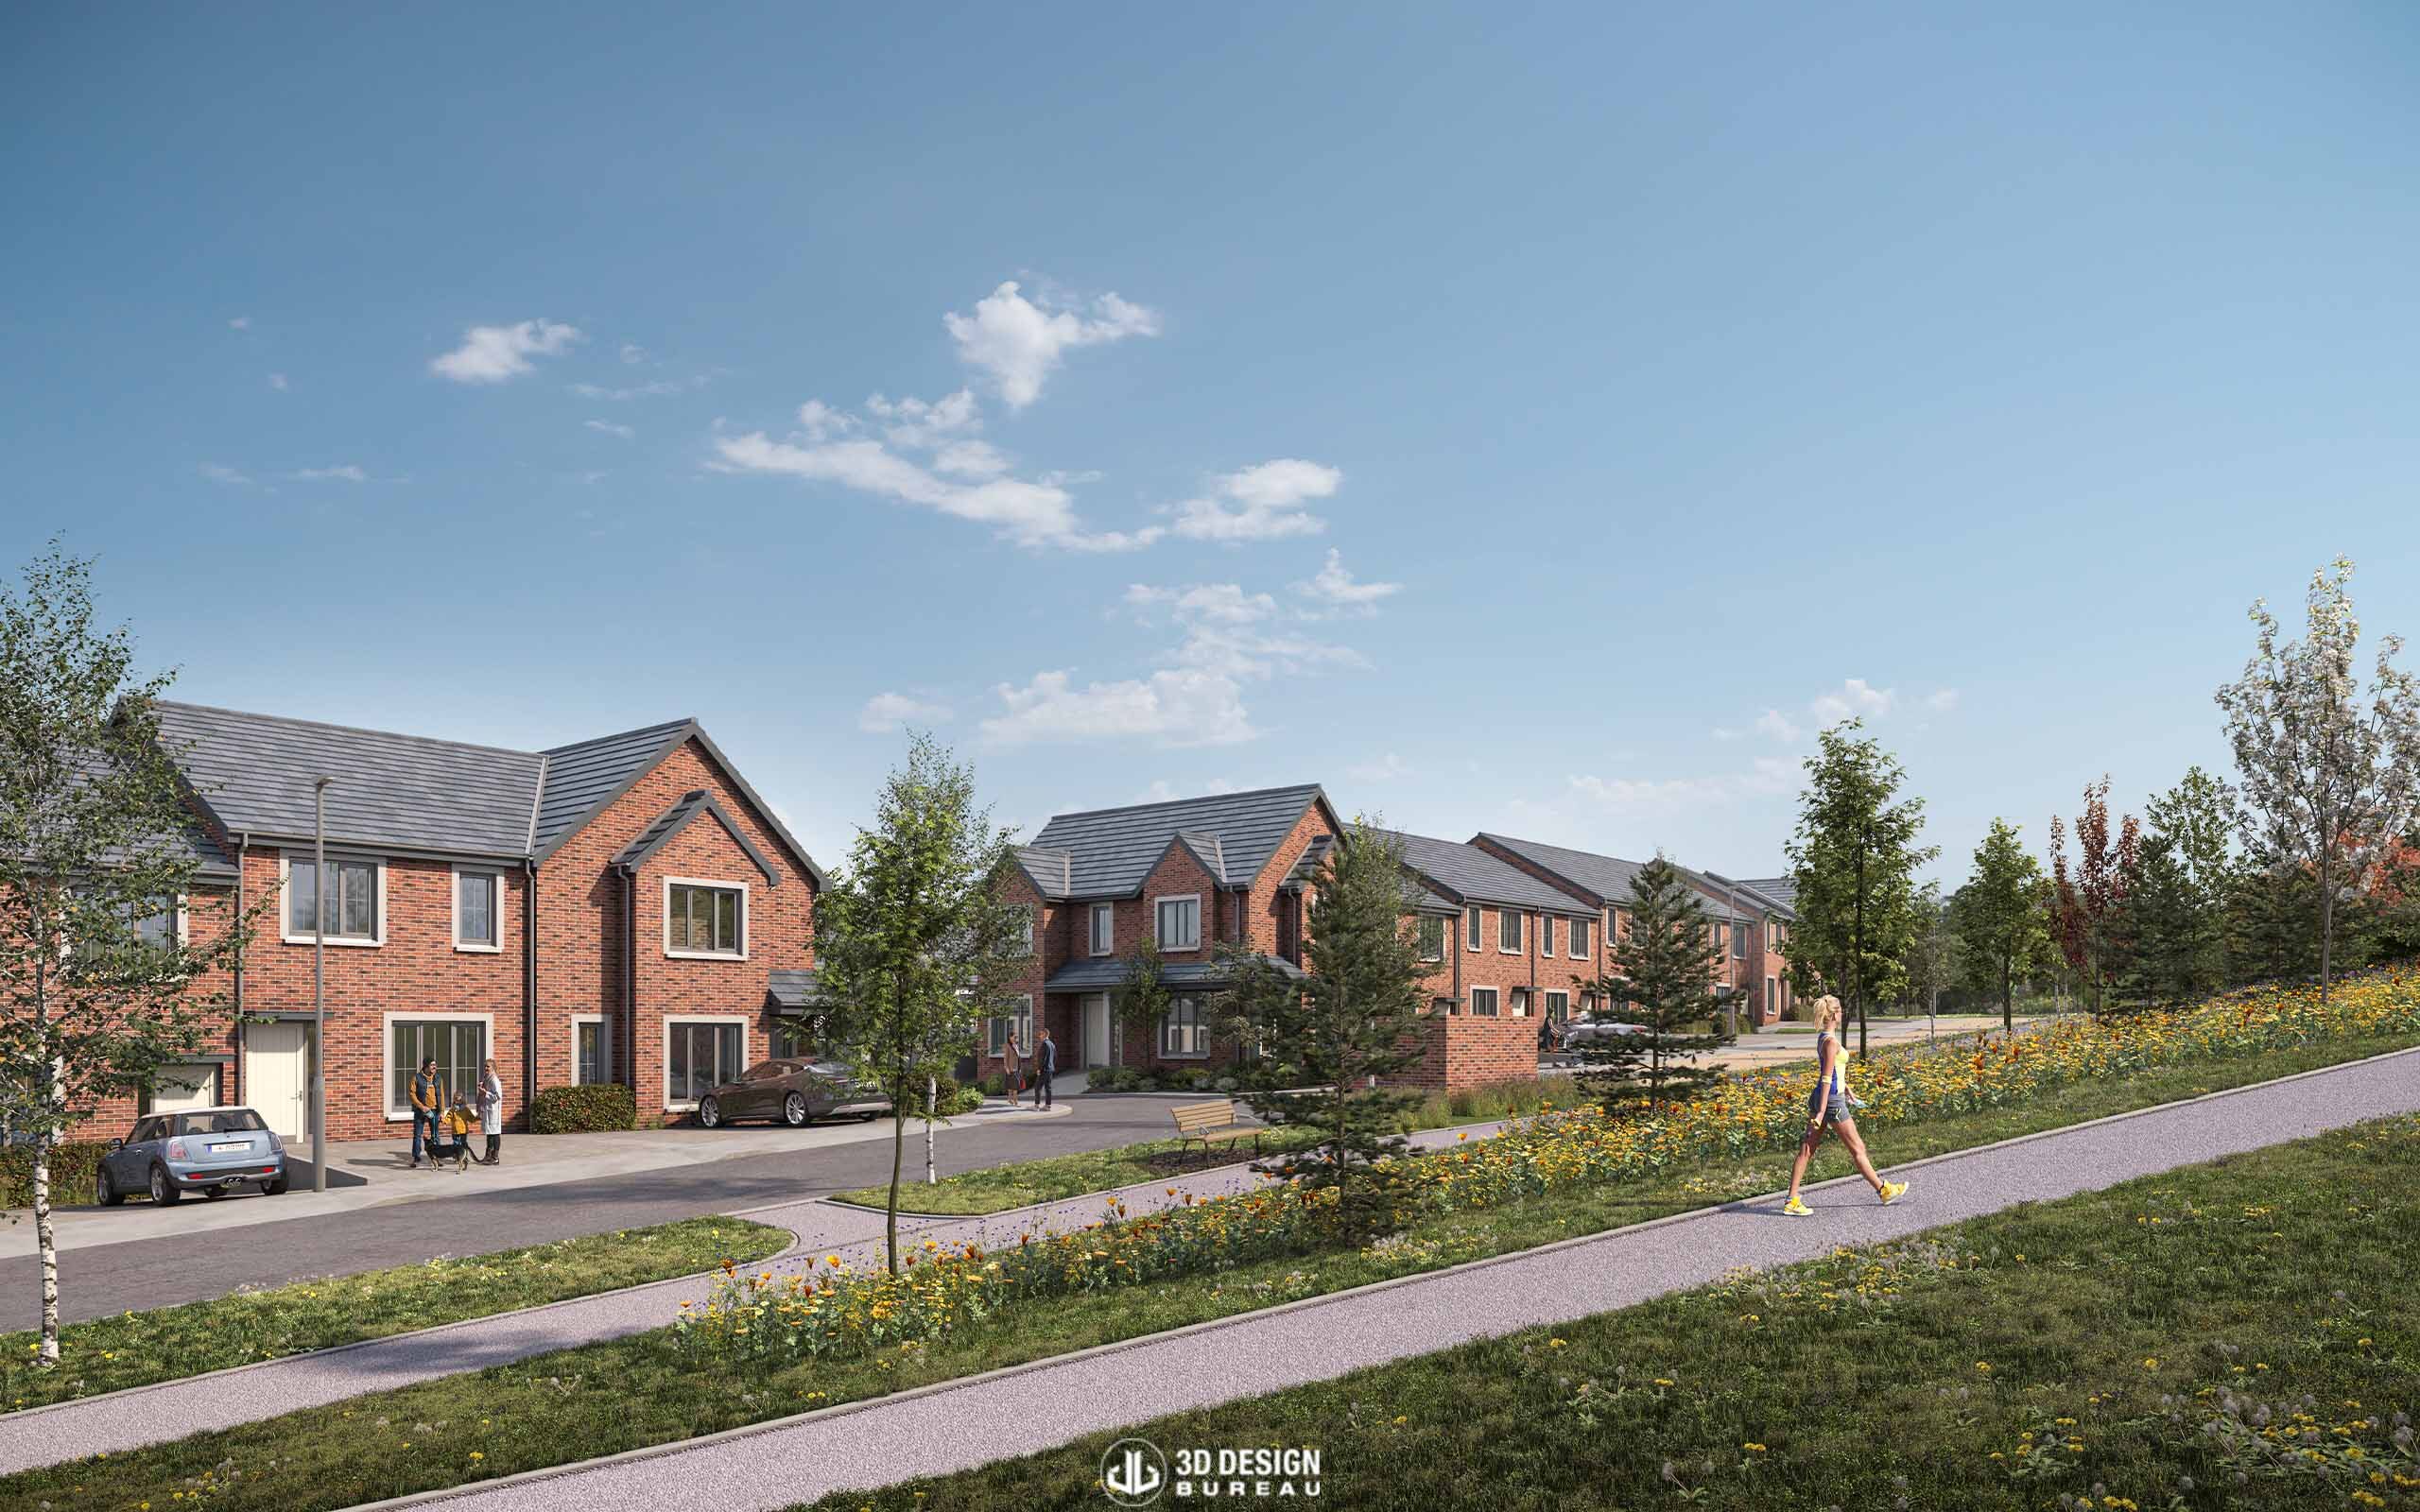 Architectural computer generated images of the proposed development in Rathcoole